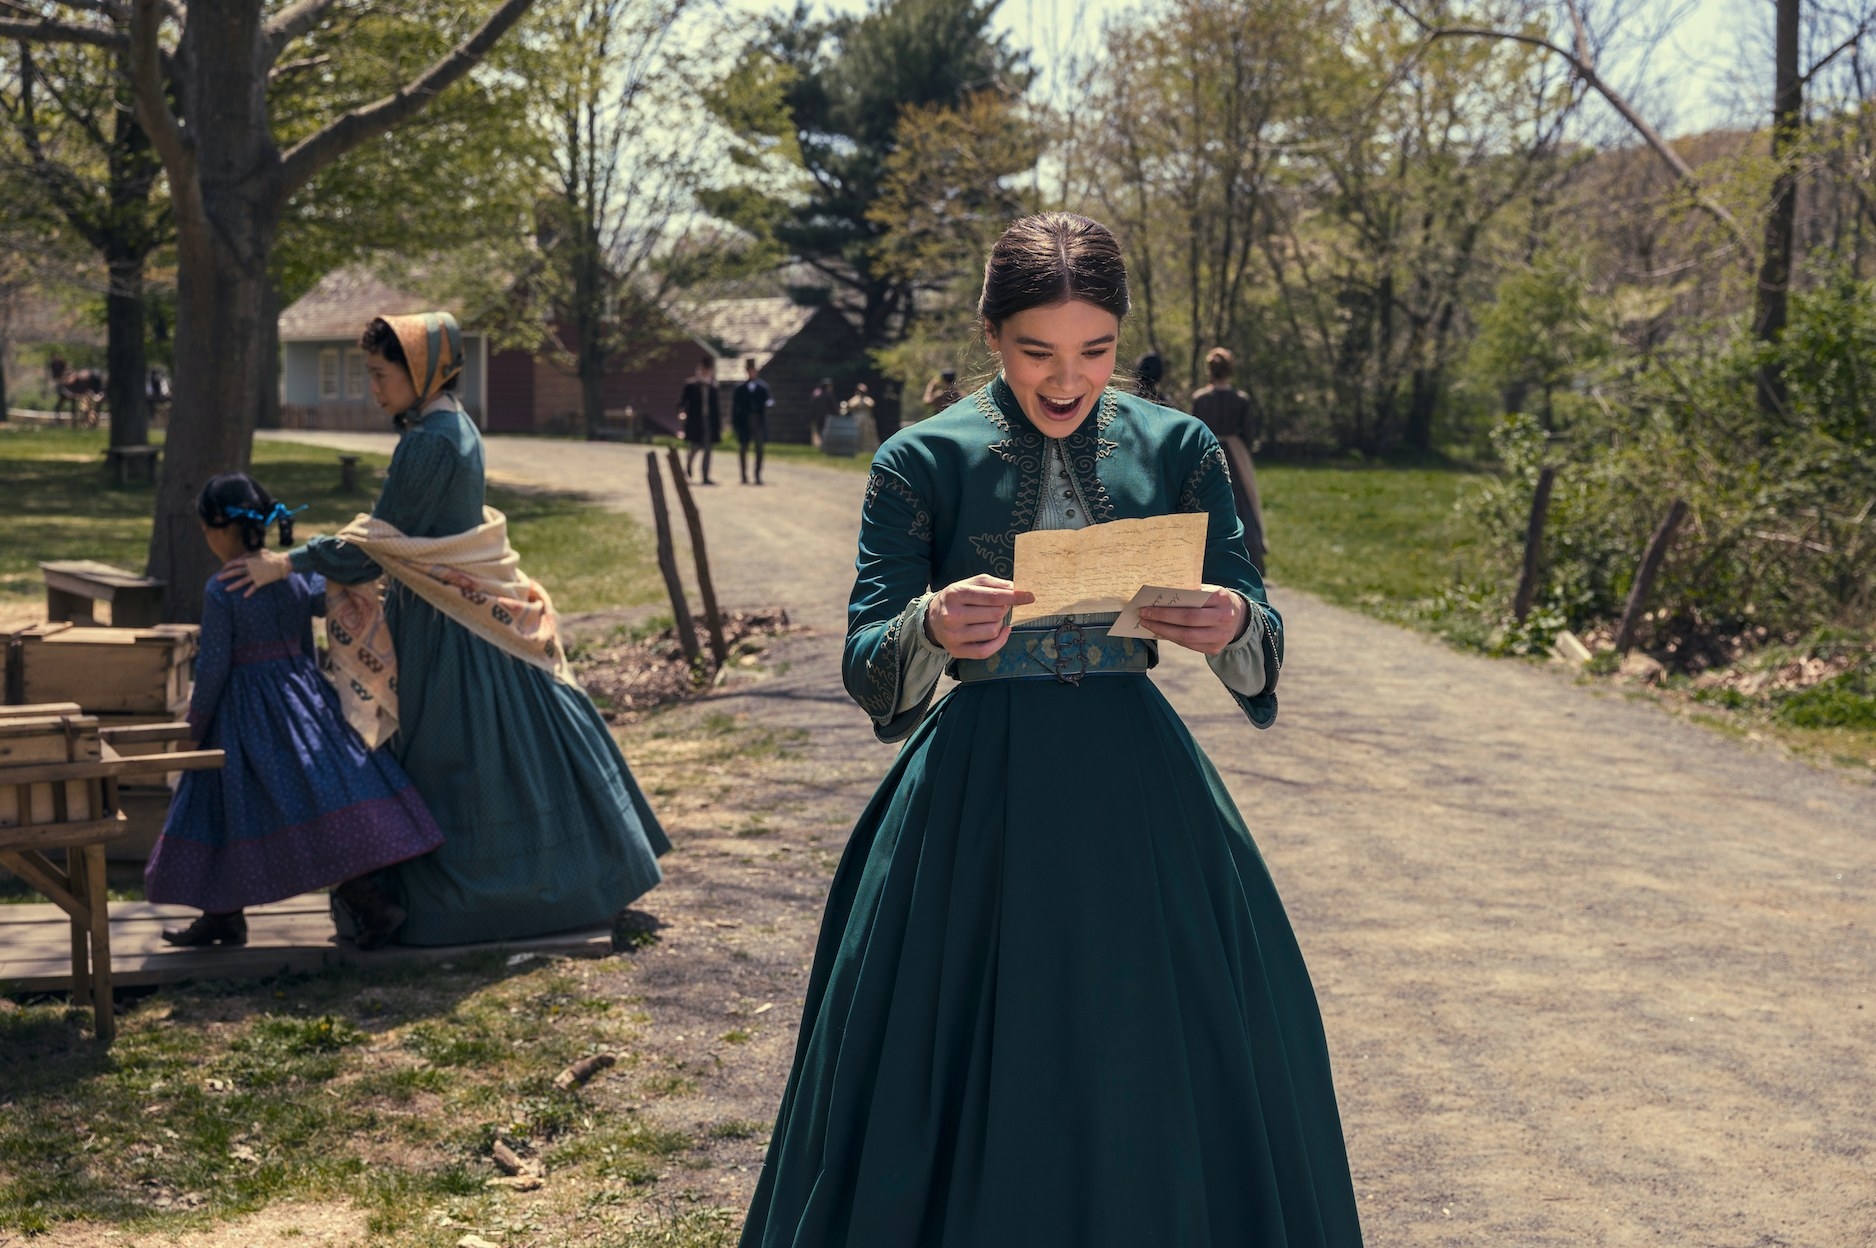 still of Emily in Dickinson walking through town while smiling at a letter